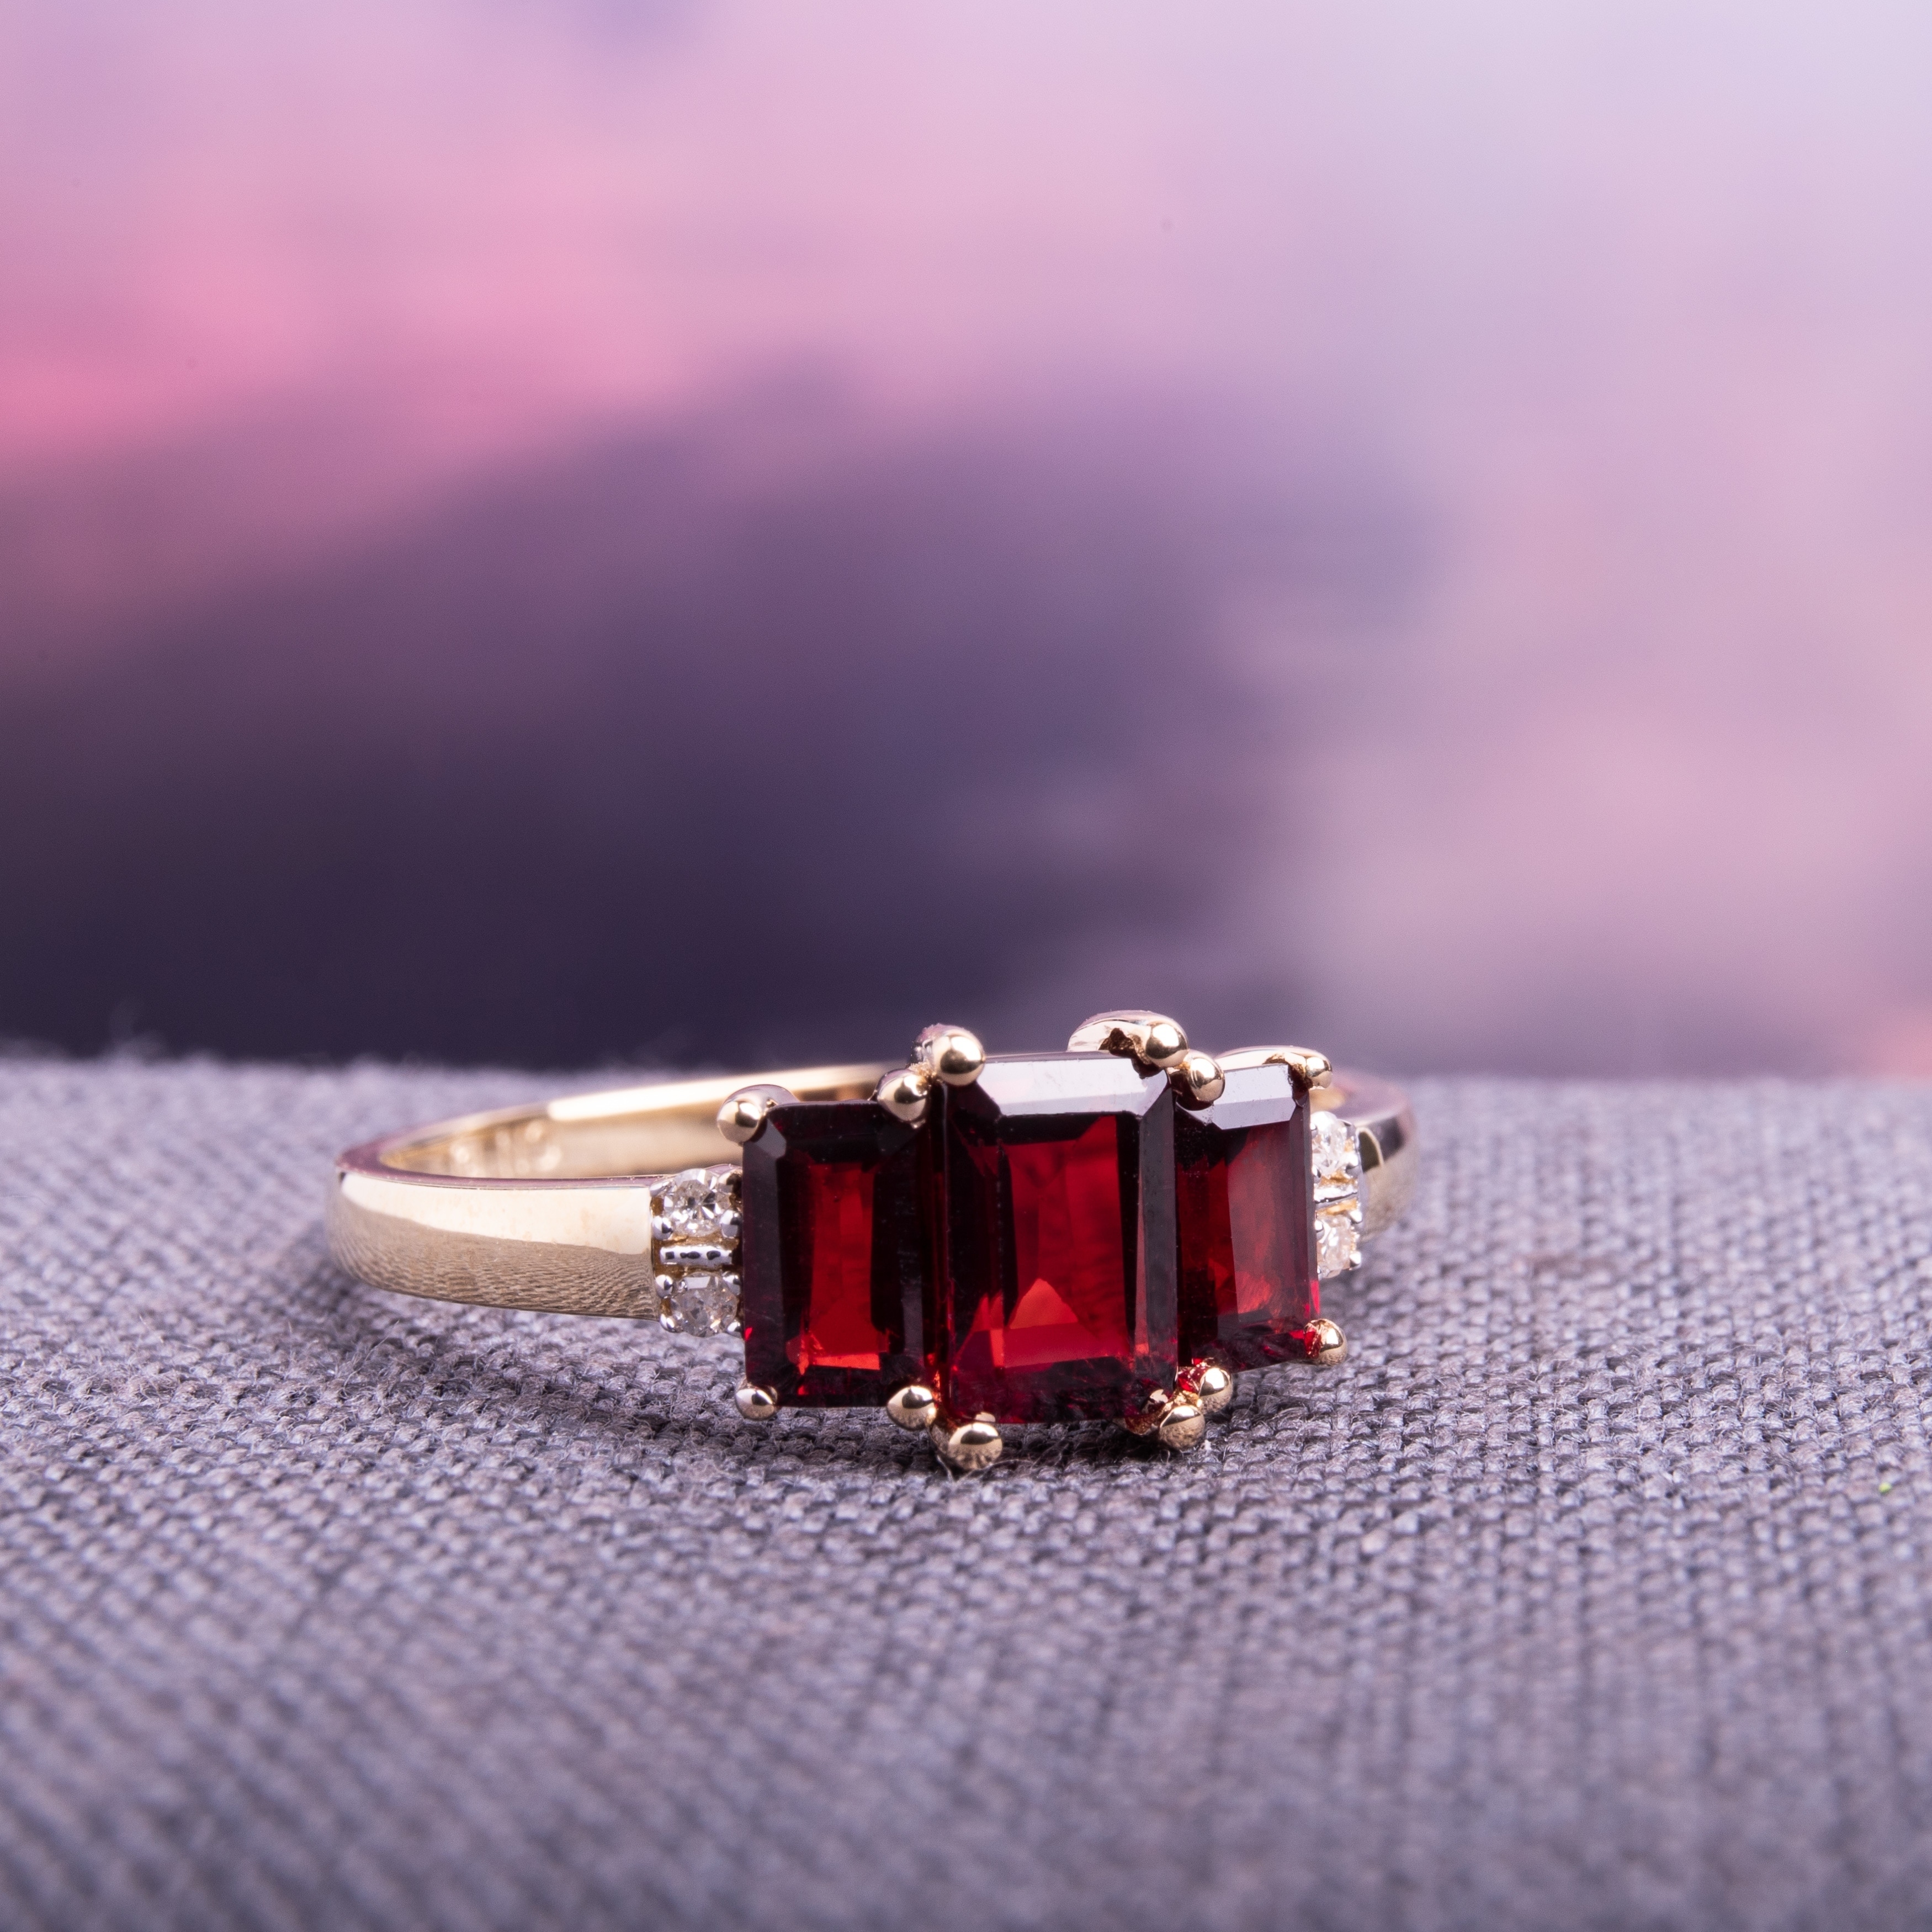 gold ring with garnet stone